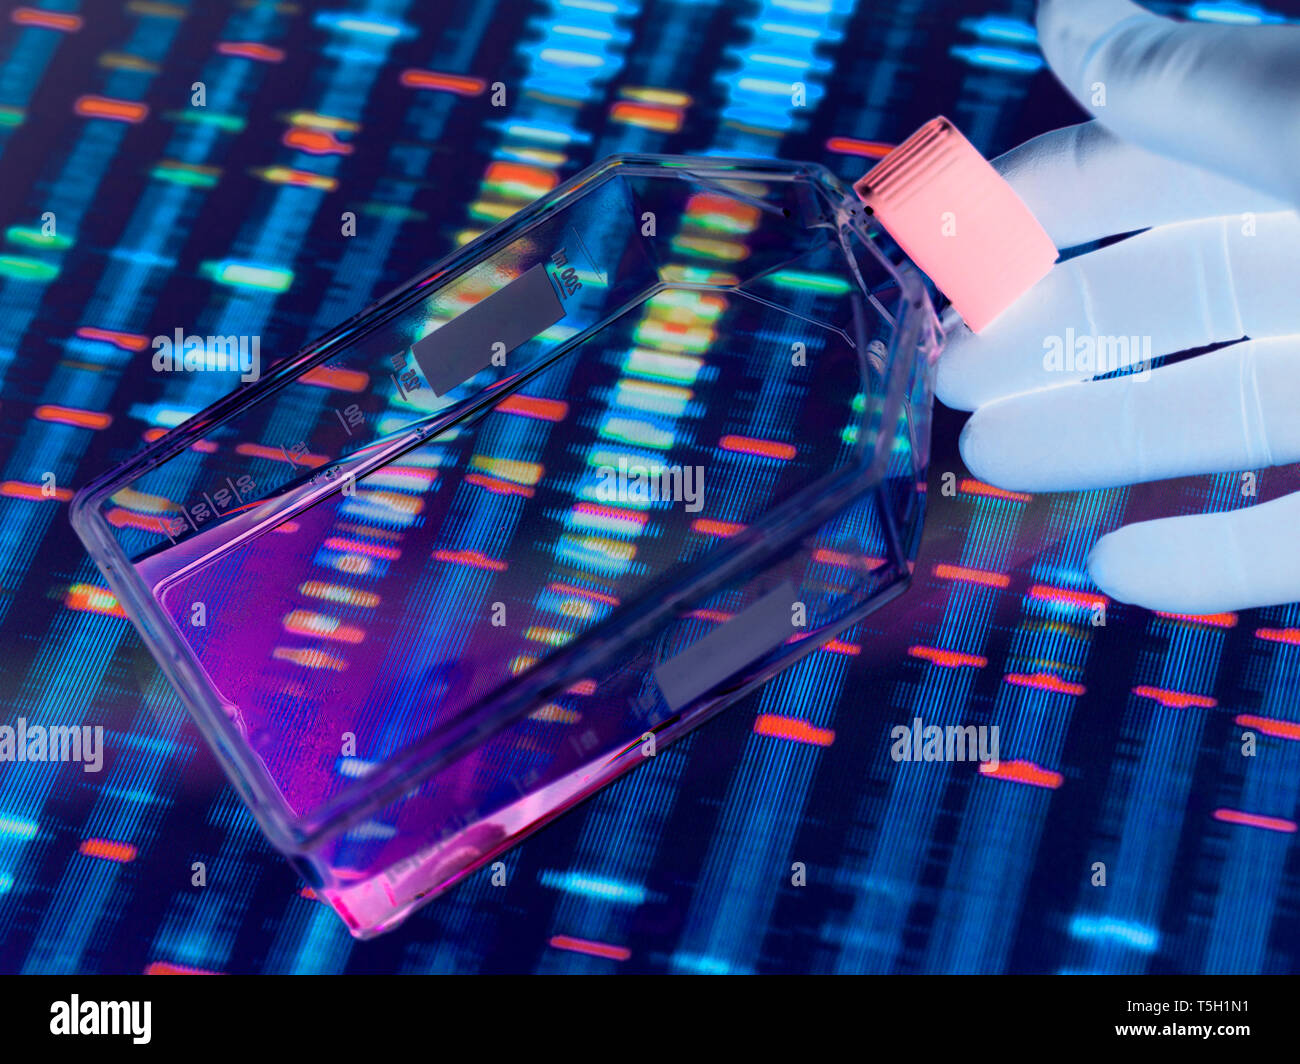 Genetic Engineering, Scientist viewing cells in a culture jar with a DNA profiles on a screen in the background illustrating gene editing Stock Photo